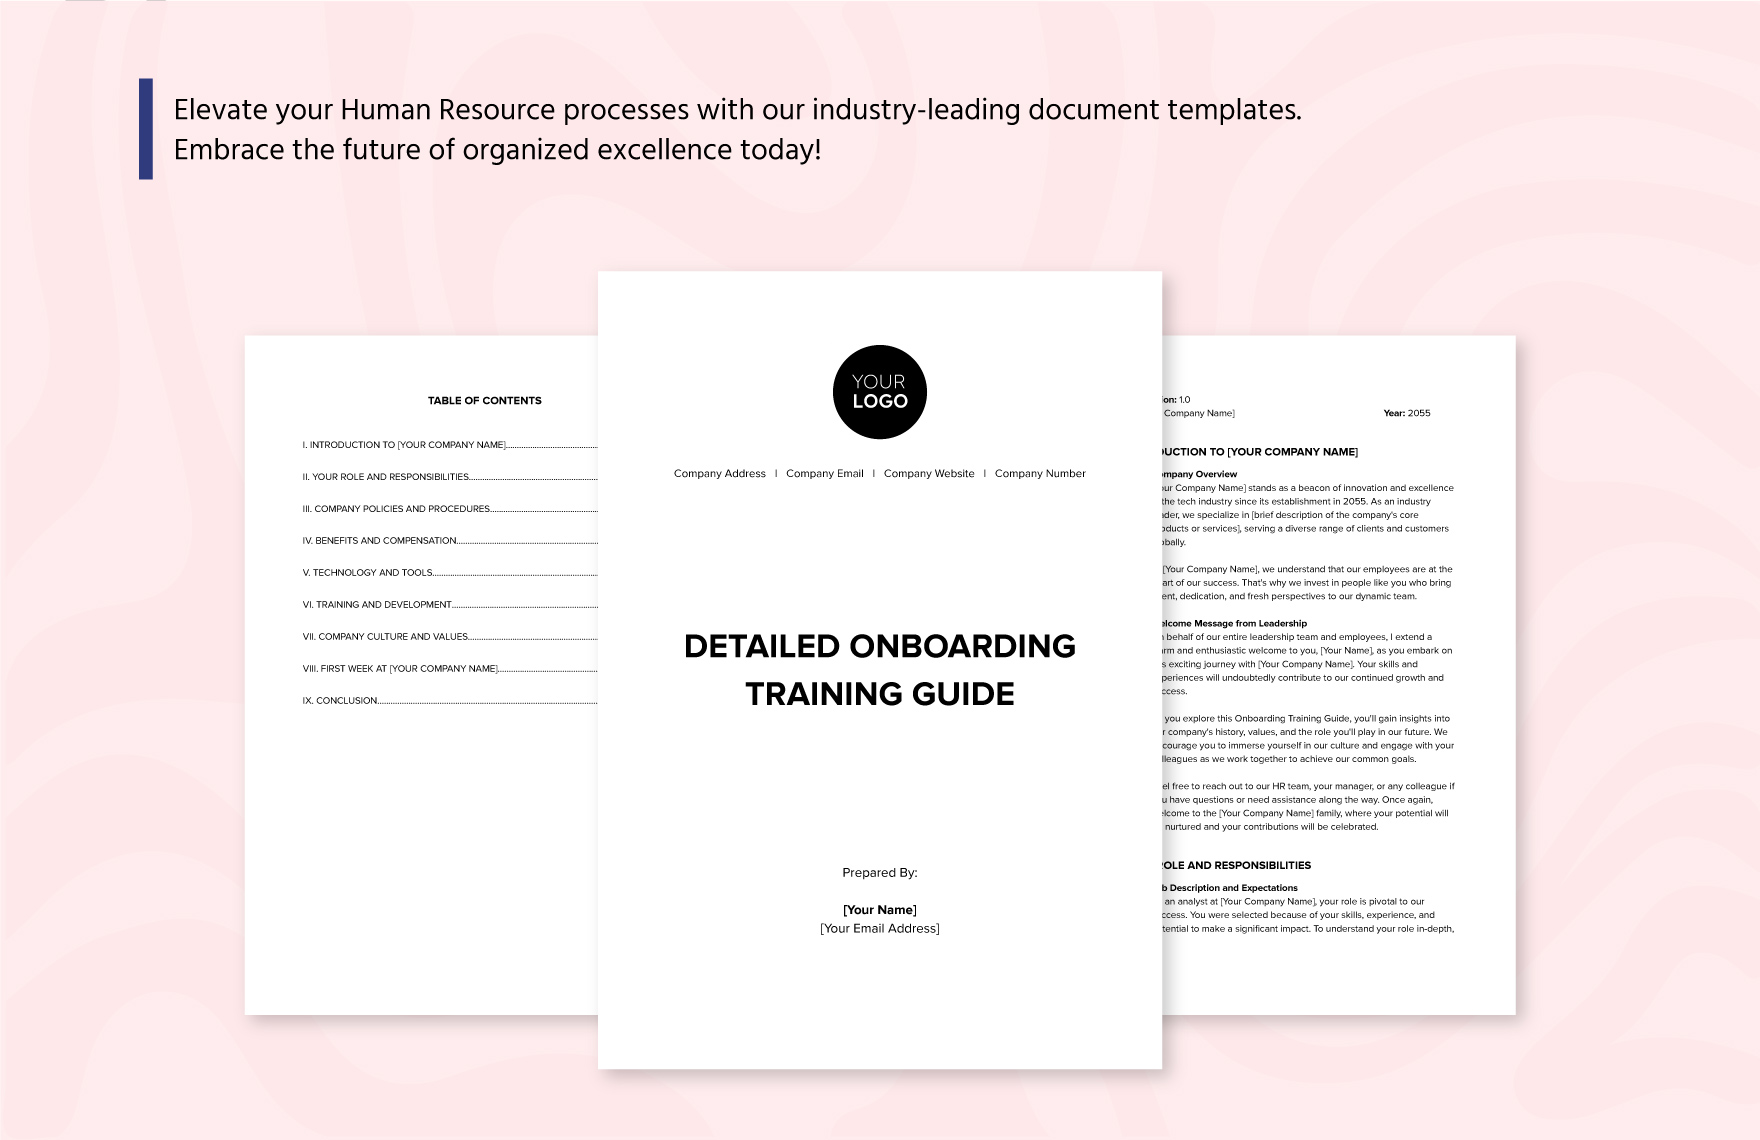 Detailed Onboarding Training Guide HR Template